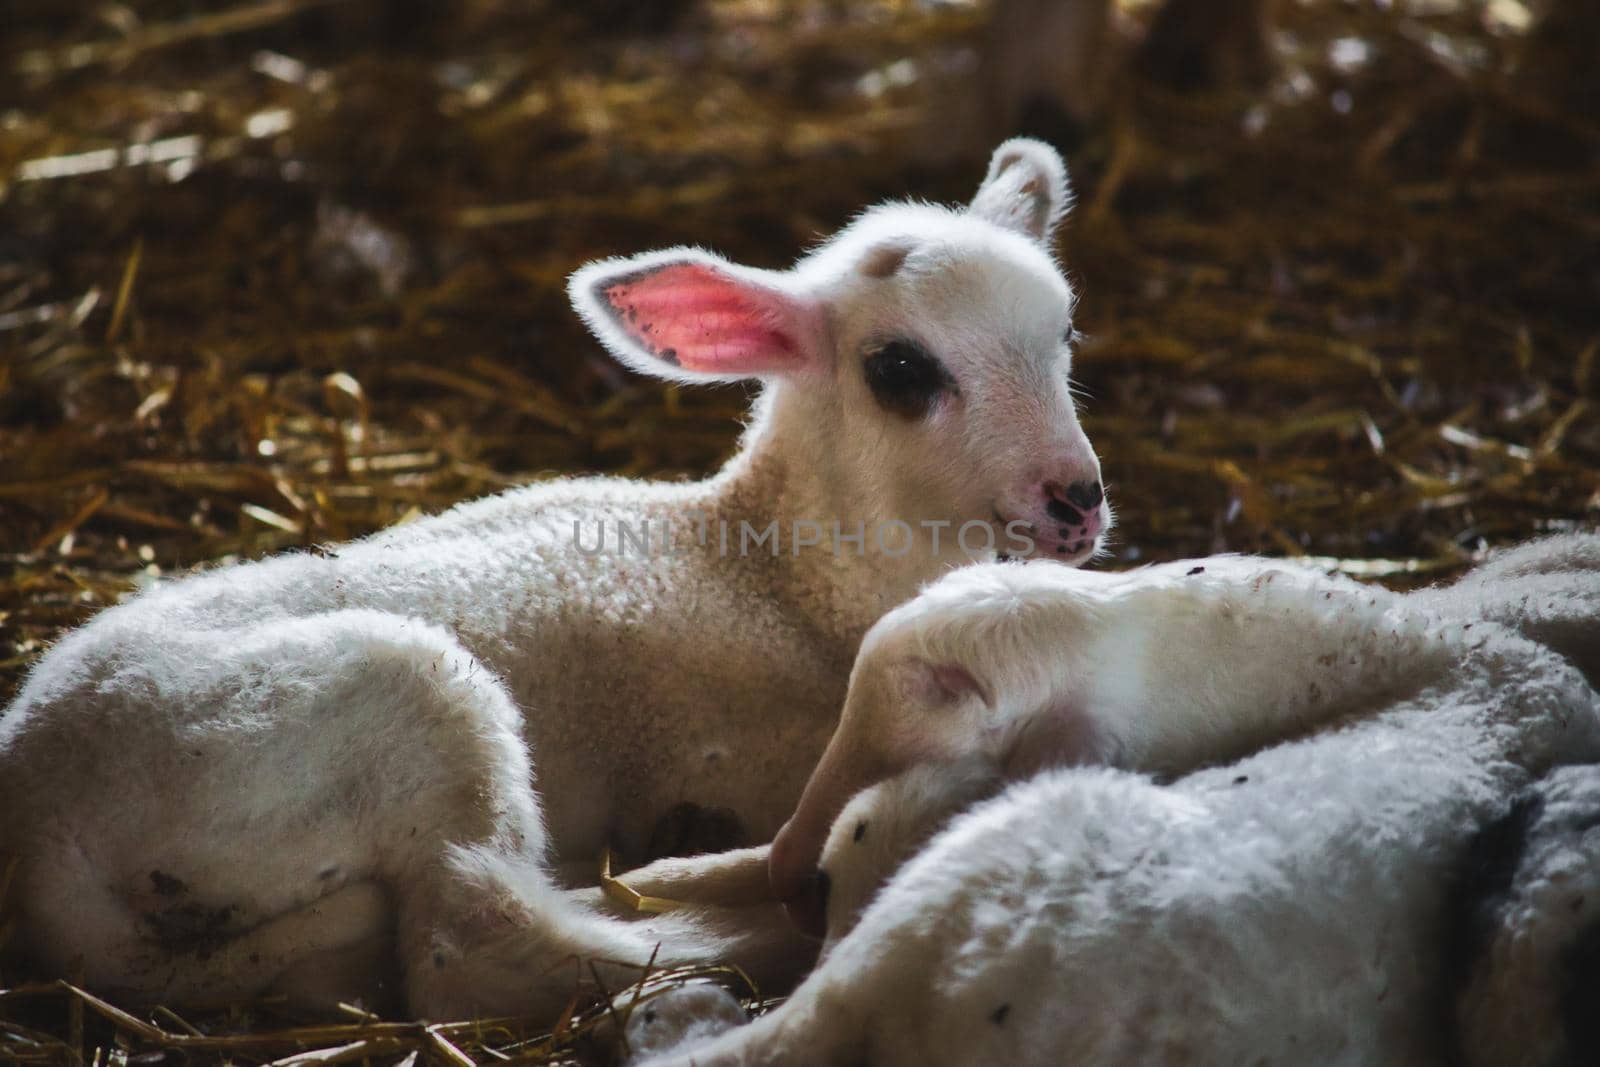 Cute white fluffy baby goat lying down on straw indoors by tennesseewitney